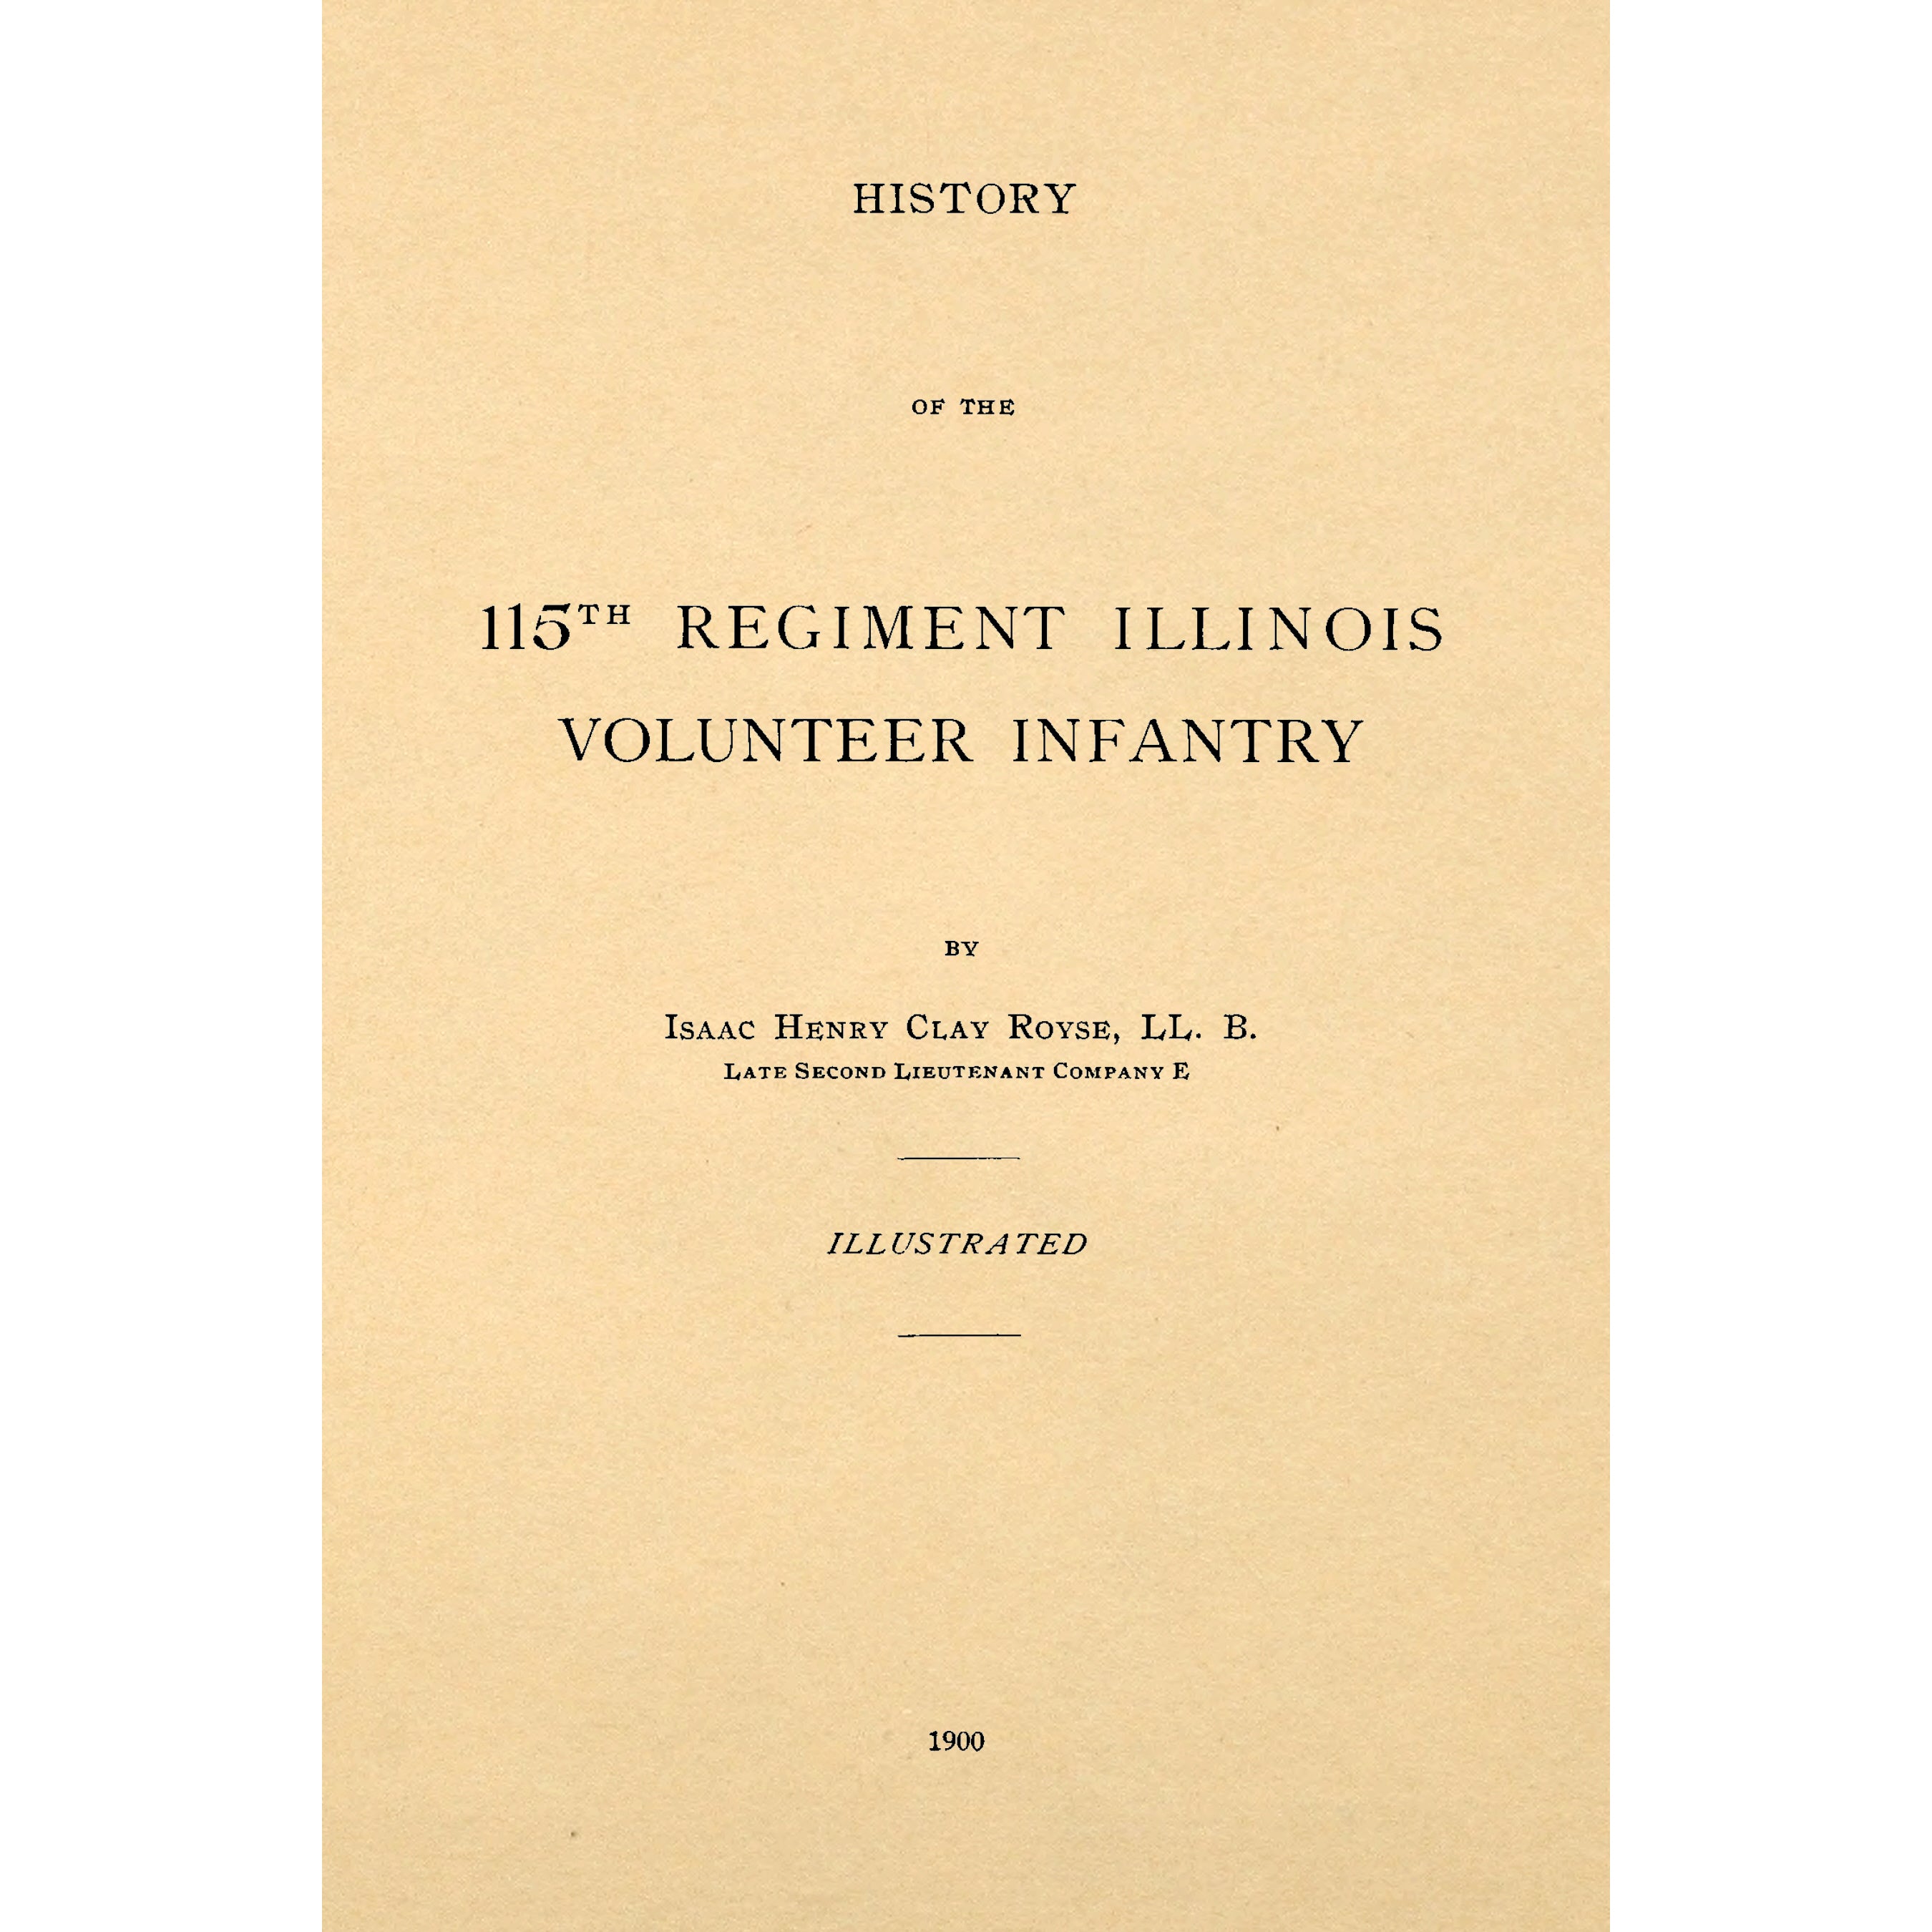 History of the 115th Regiment, Illinois Volunteer Infantry